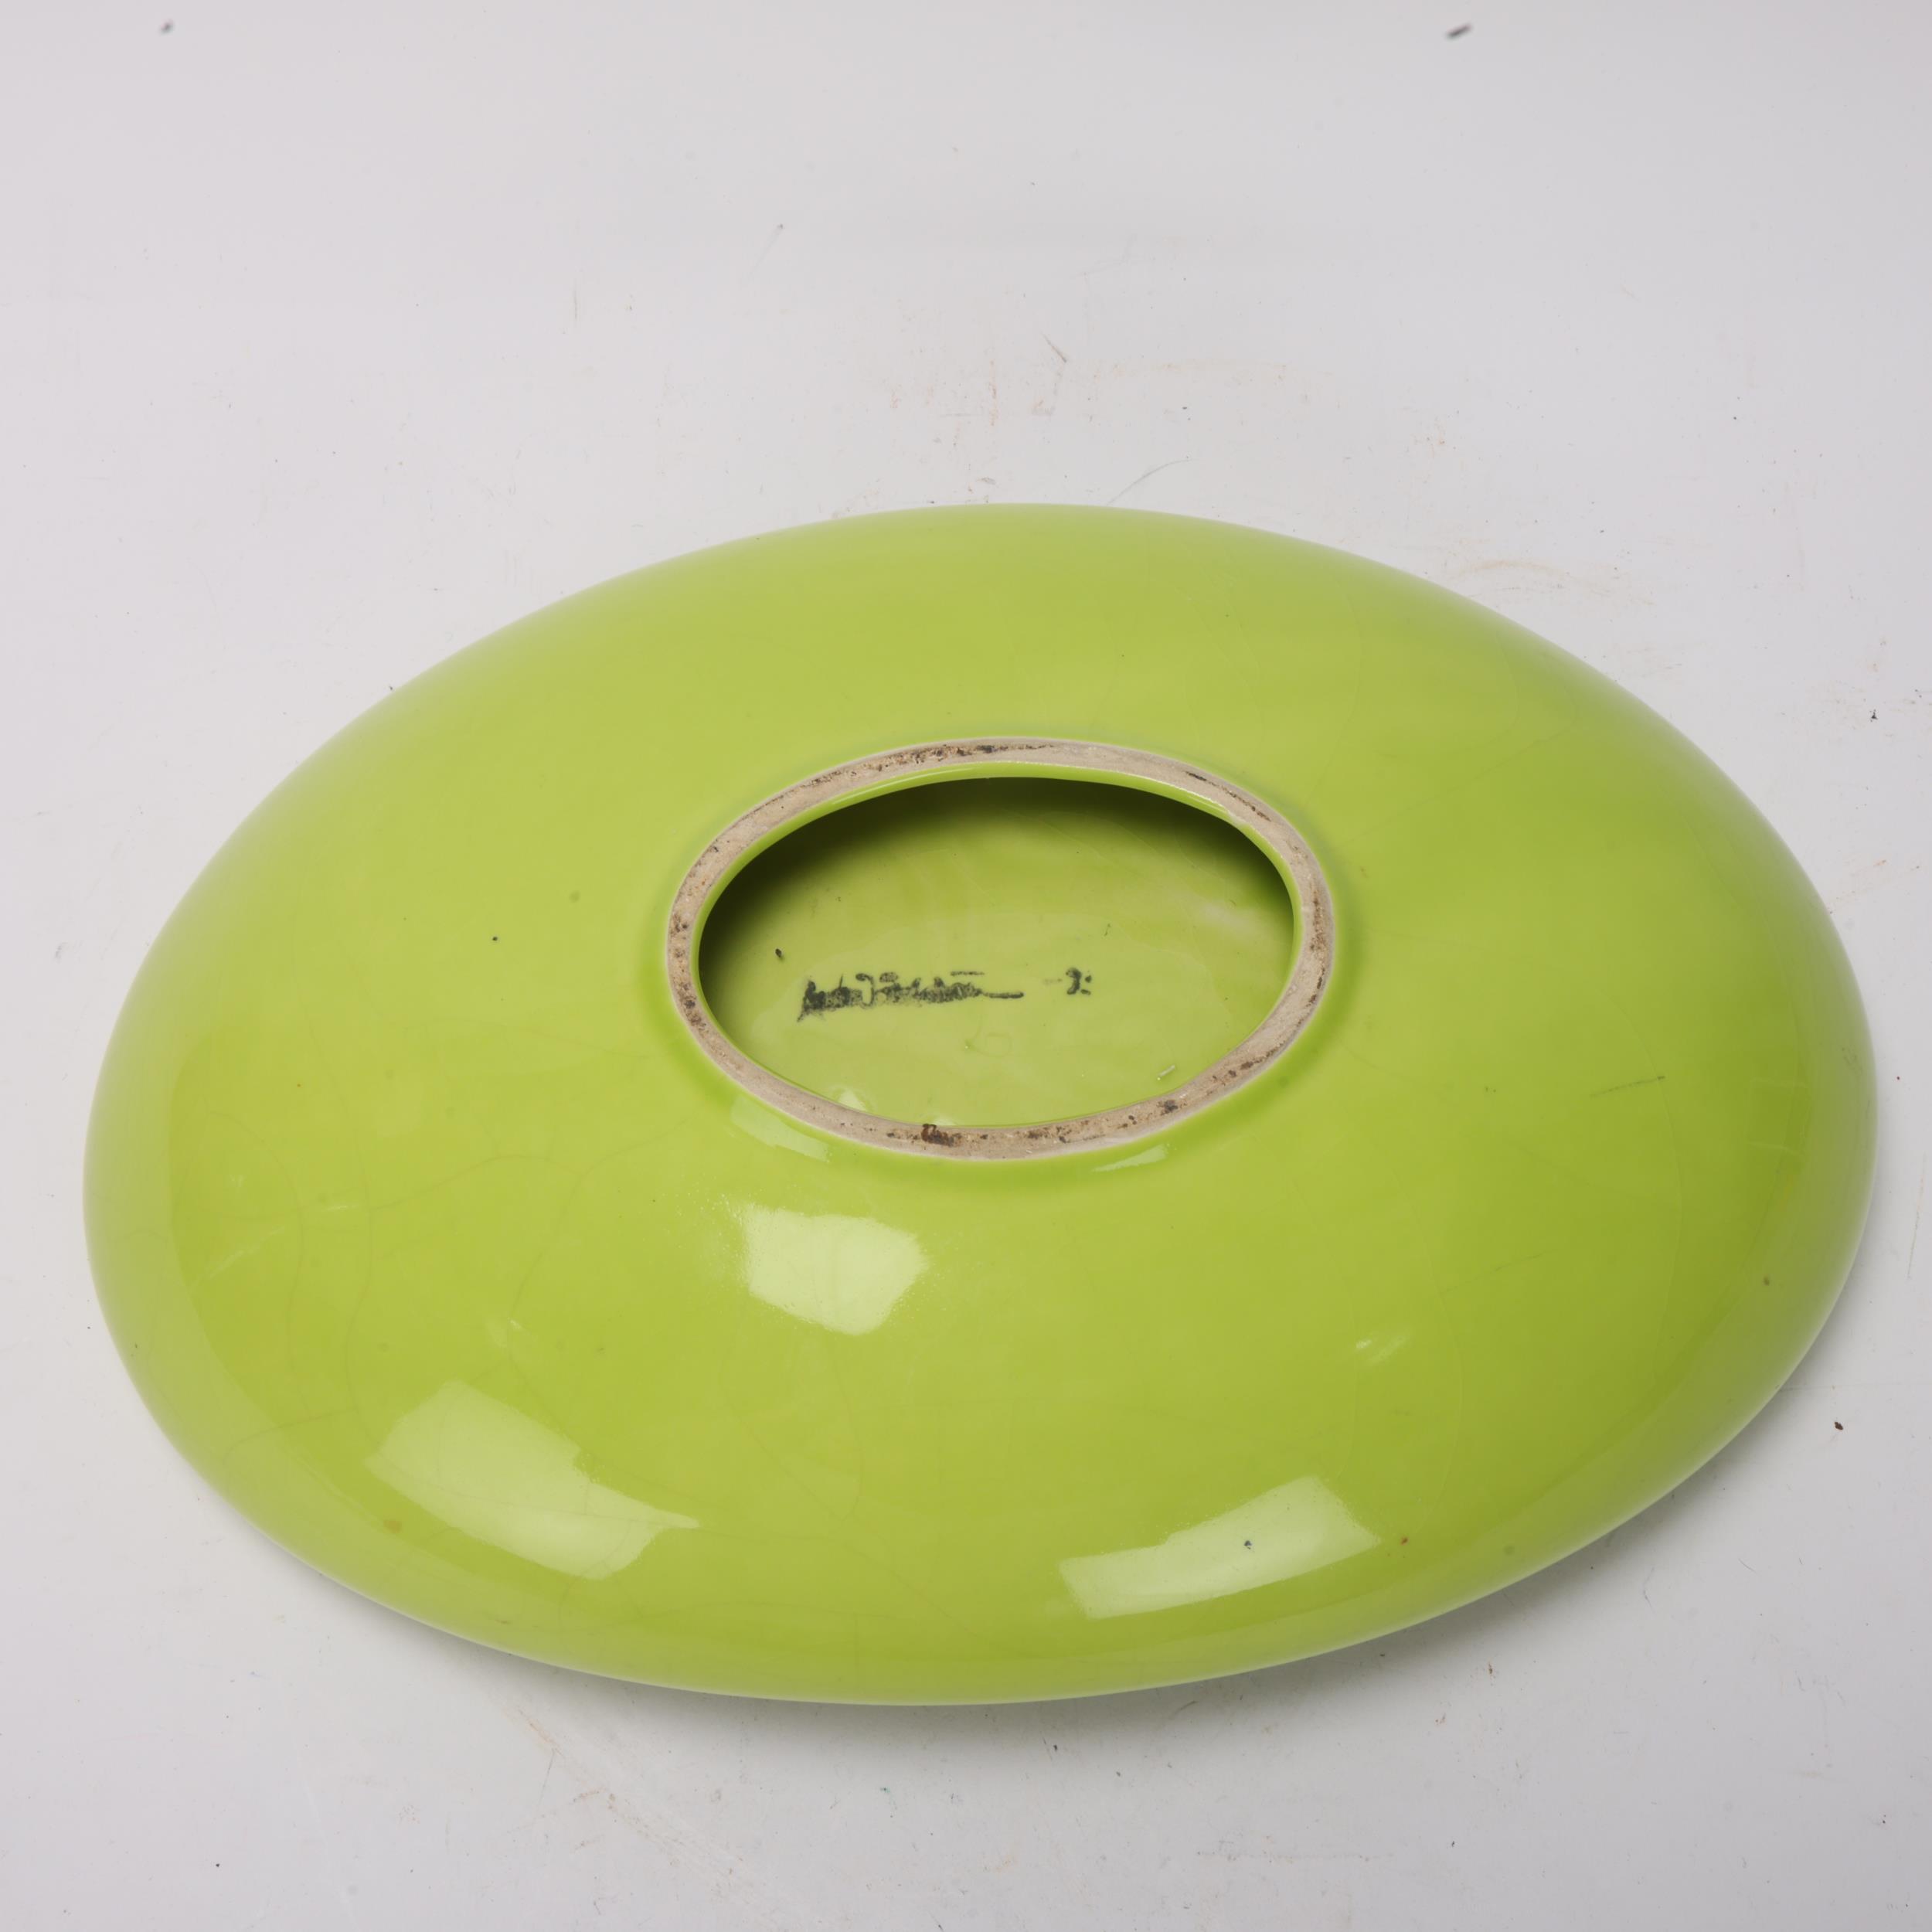 A mid 20th century elliptical centre dish with lime green glaze, indistinct makers mark under - Image 3 of 3